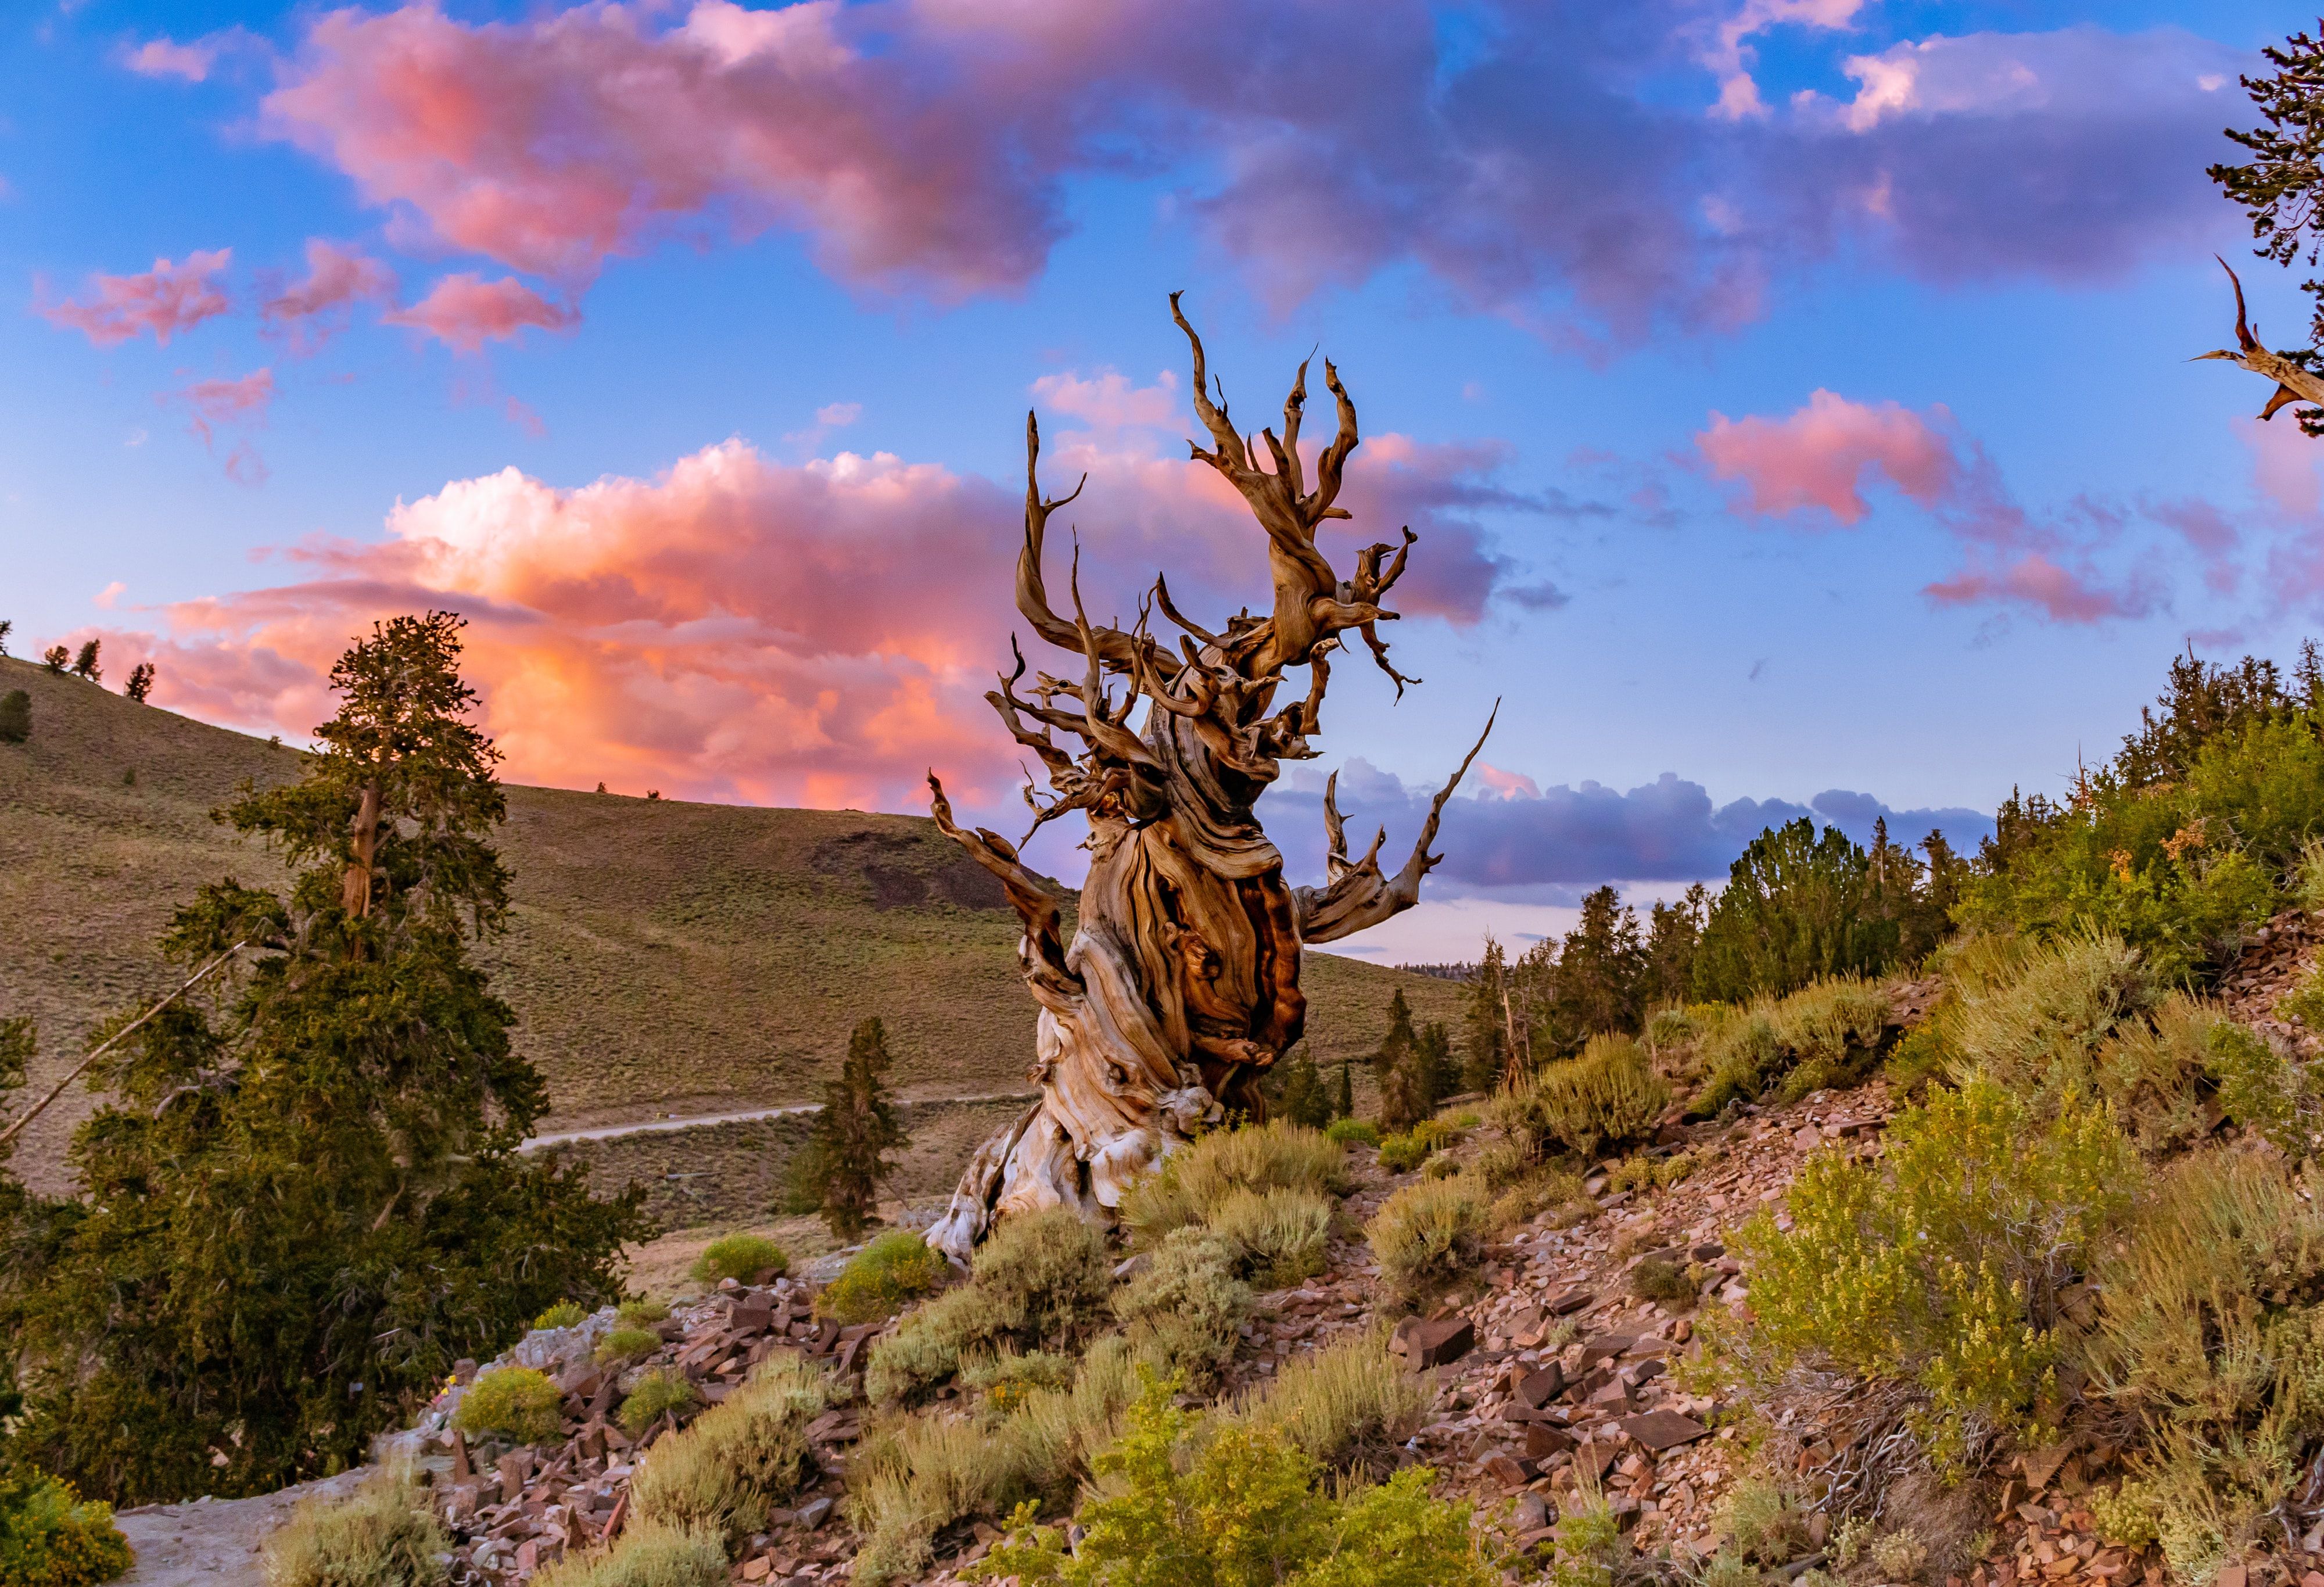 Meet Methuselah The Worlds Oldest Tree In Californias Ancient Bristlecone Pine Forest